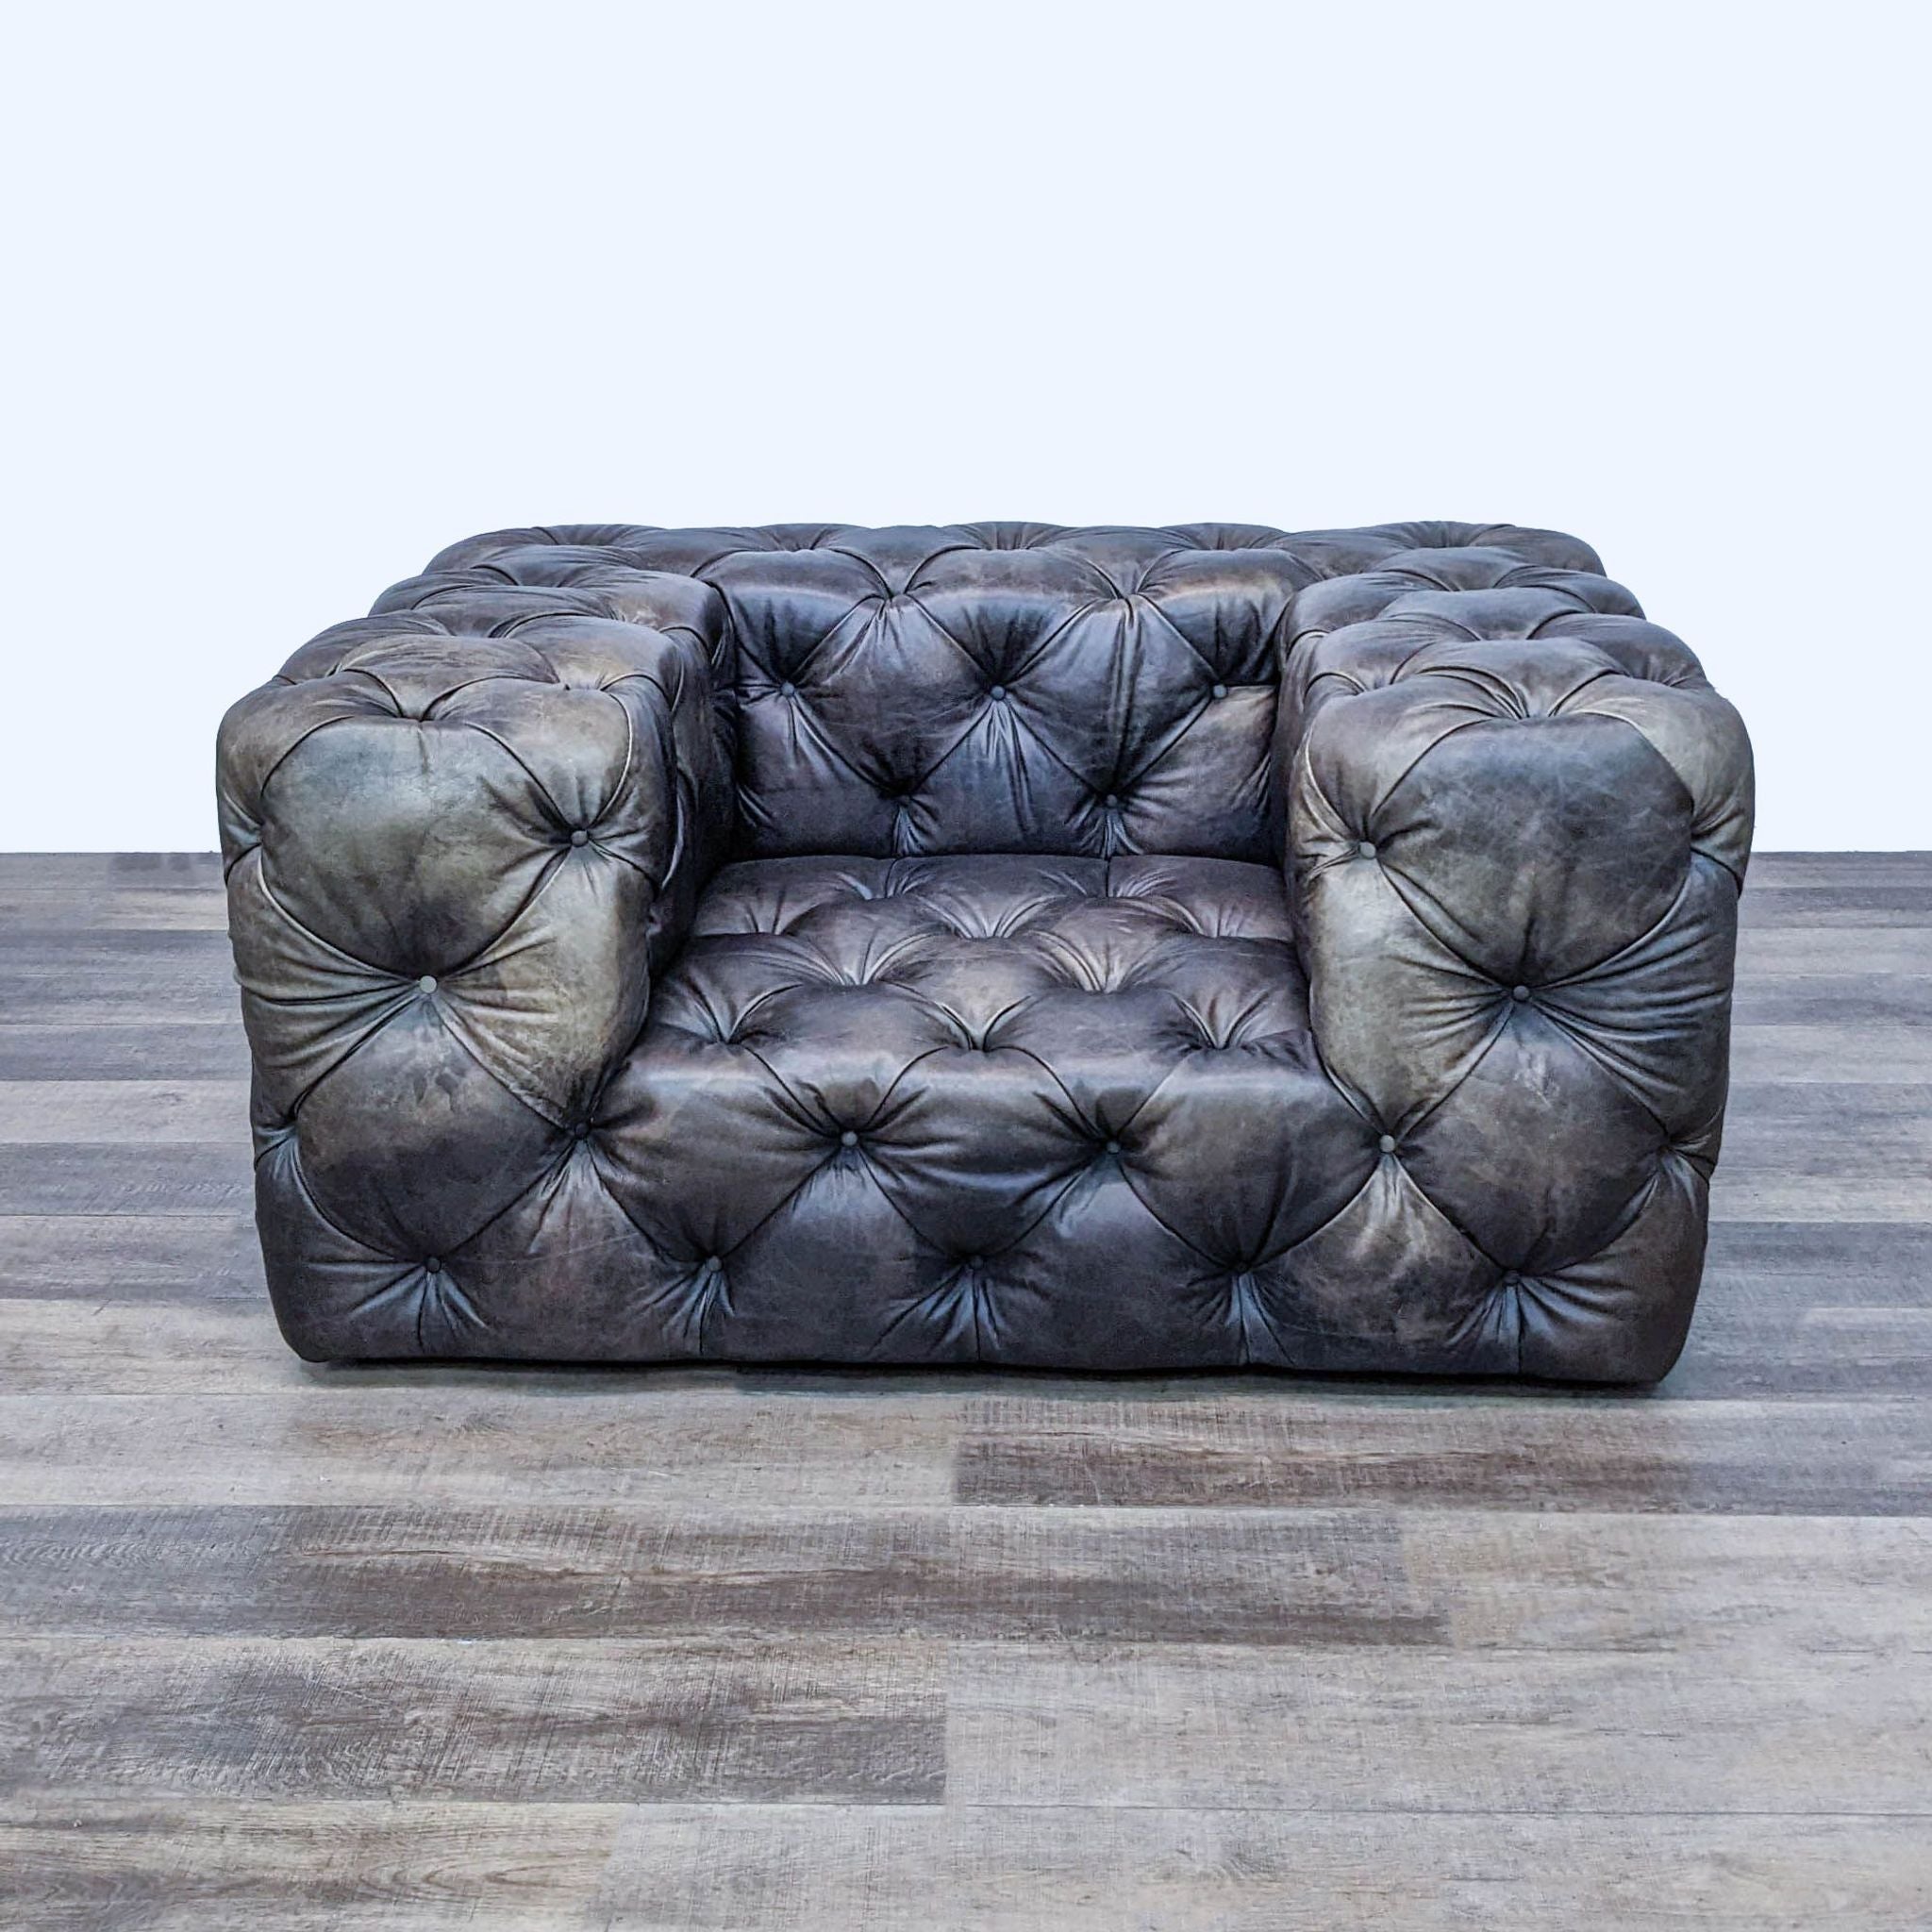 Alt text 1: Restoration Hardware's SoHo club chair with plush, button-tufted upholstery in a dark leather, showcasing its Chesterfield design and low seat profile.